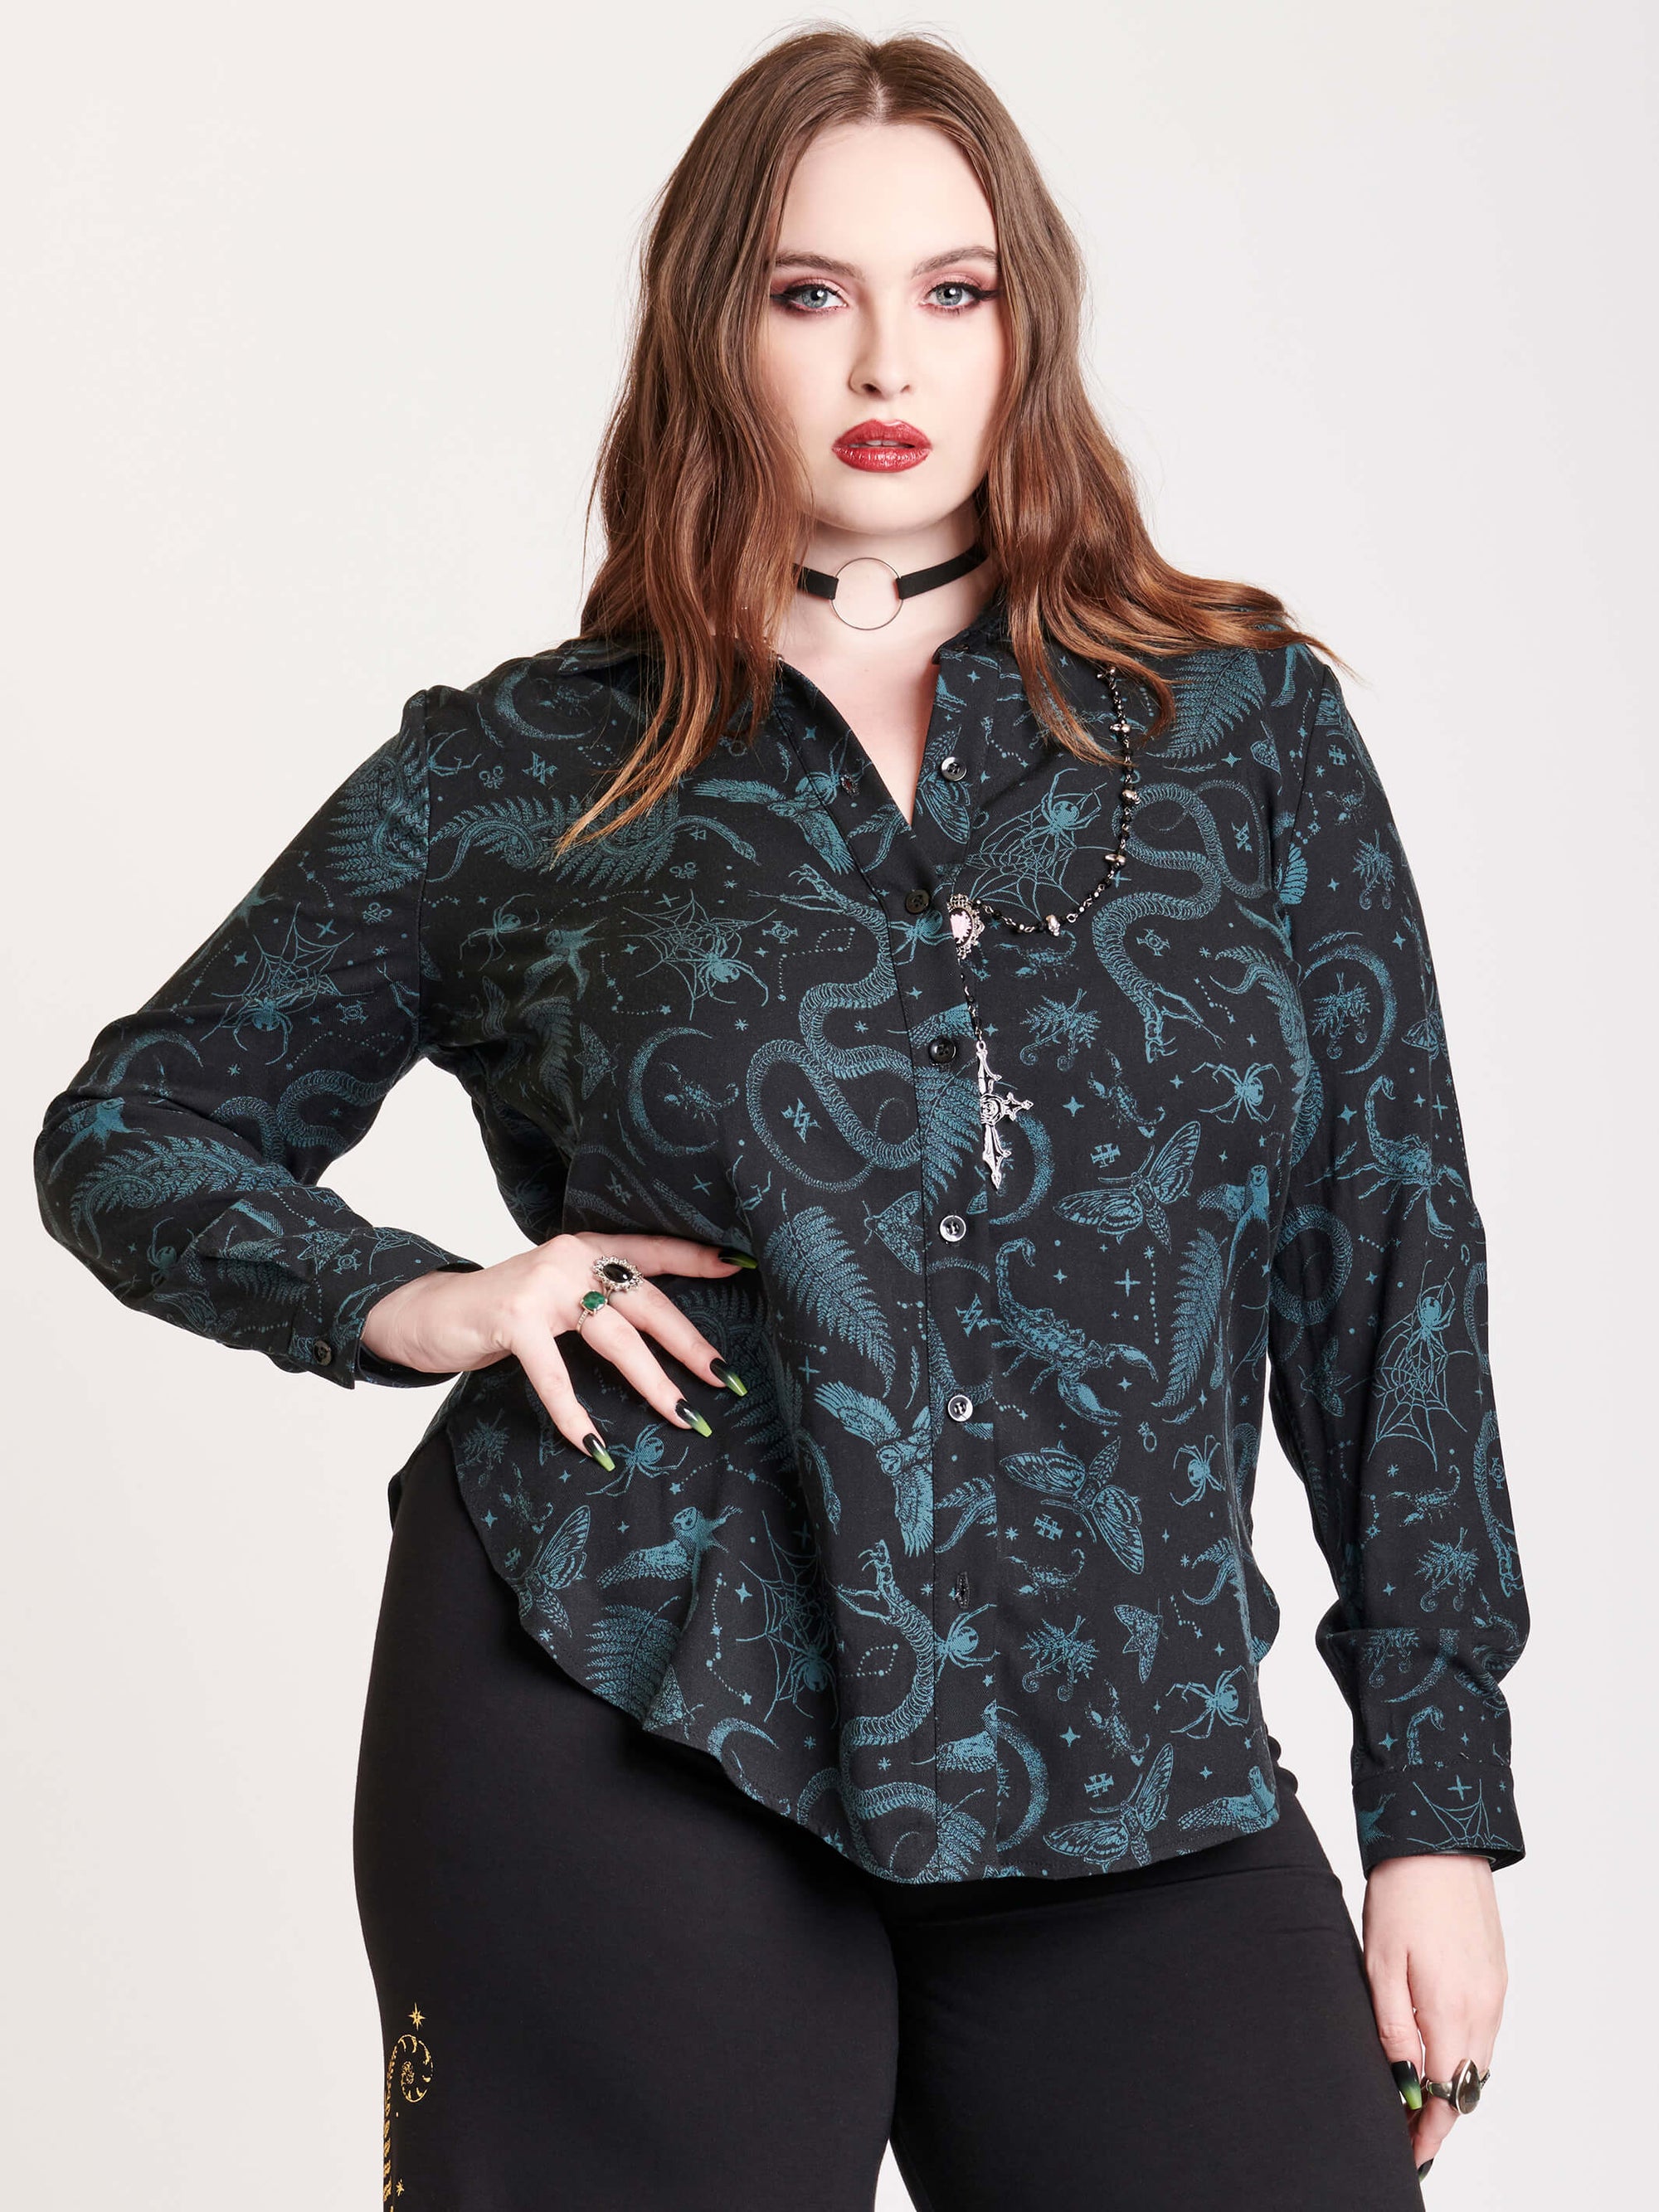 Long sleeve button up top with black and green all over print